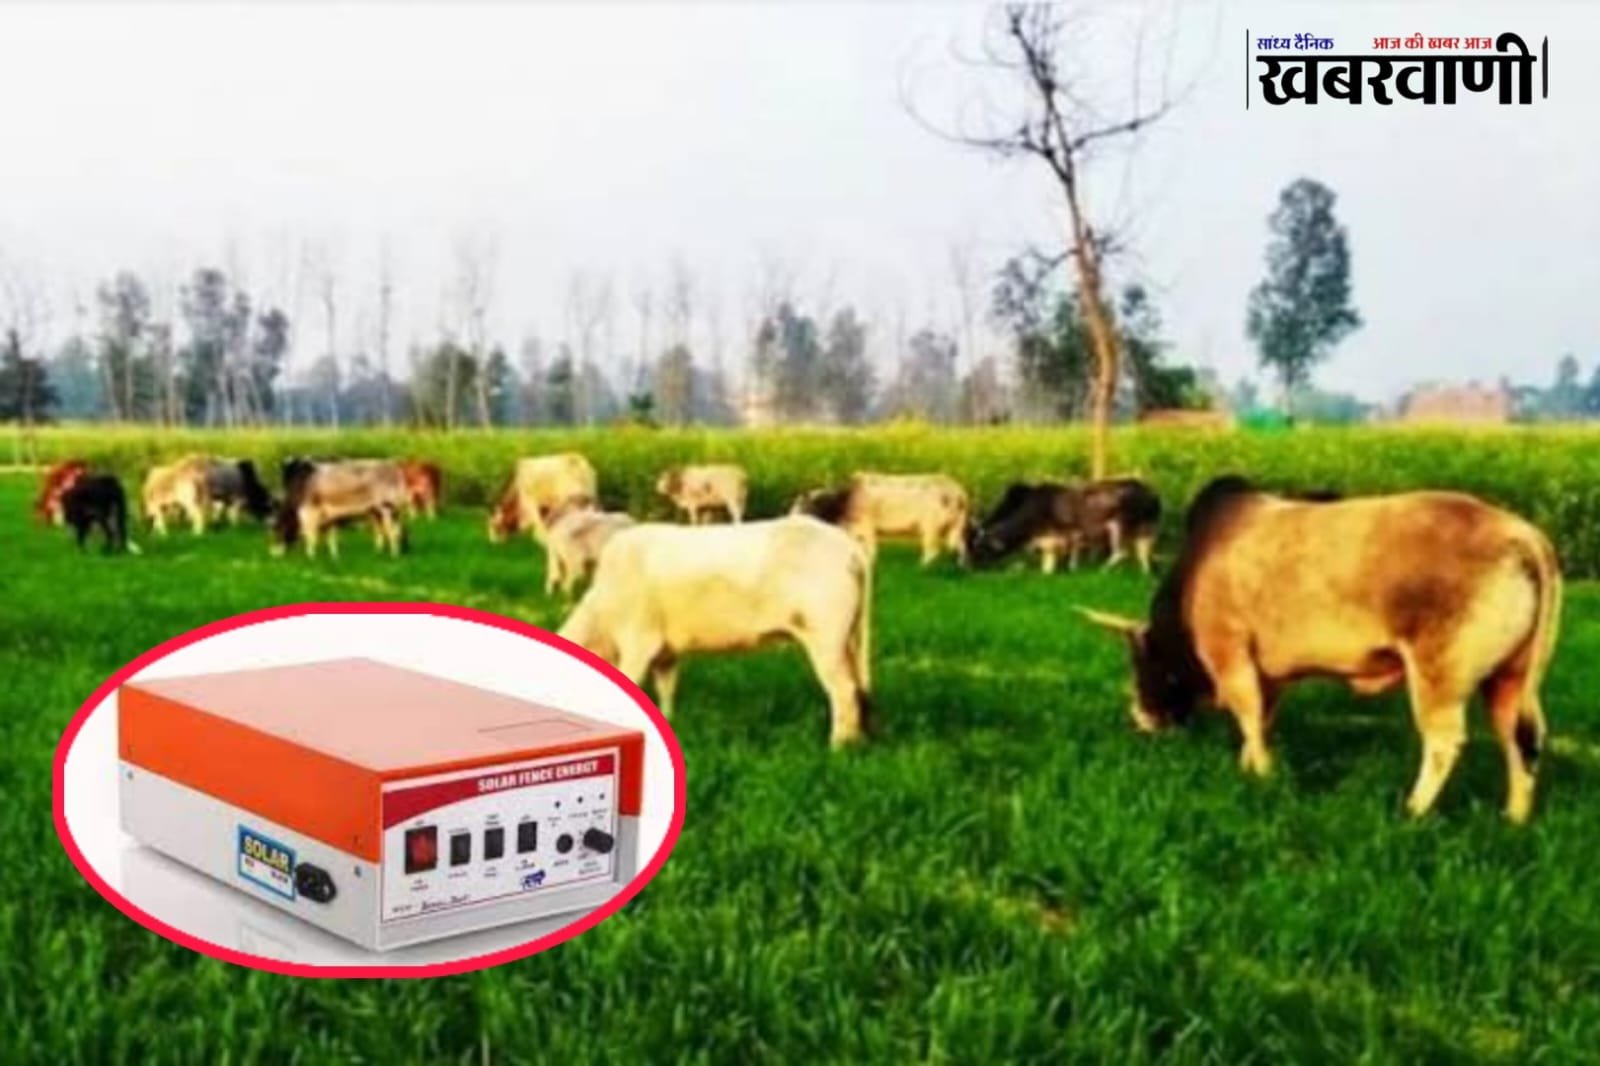 This Jhatka Machine will stop Nilgai and stray animals from creating havoc in the fields.